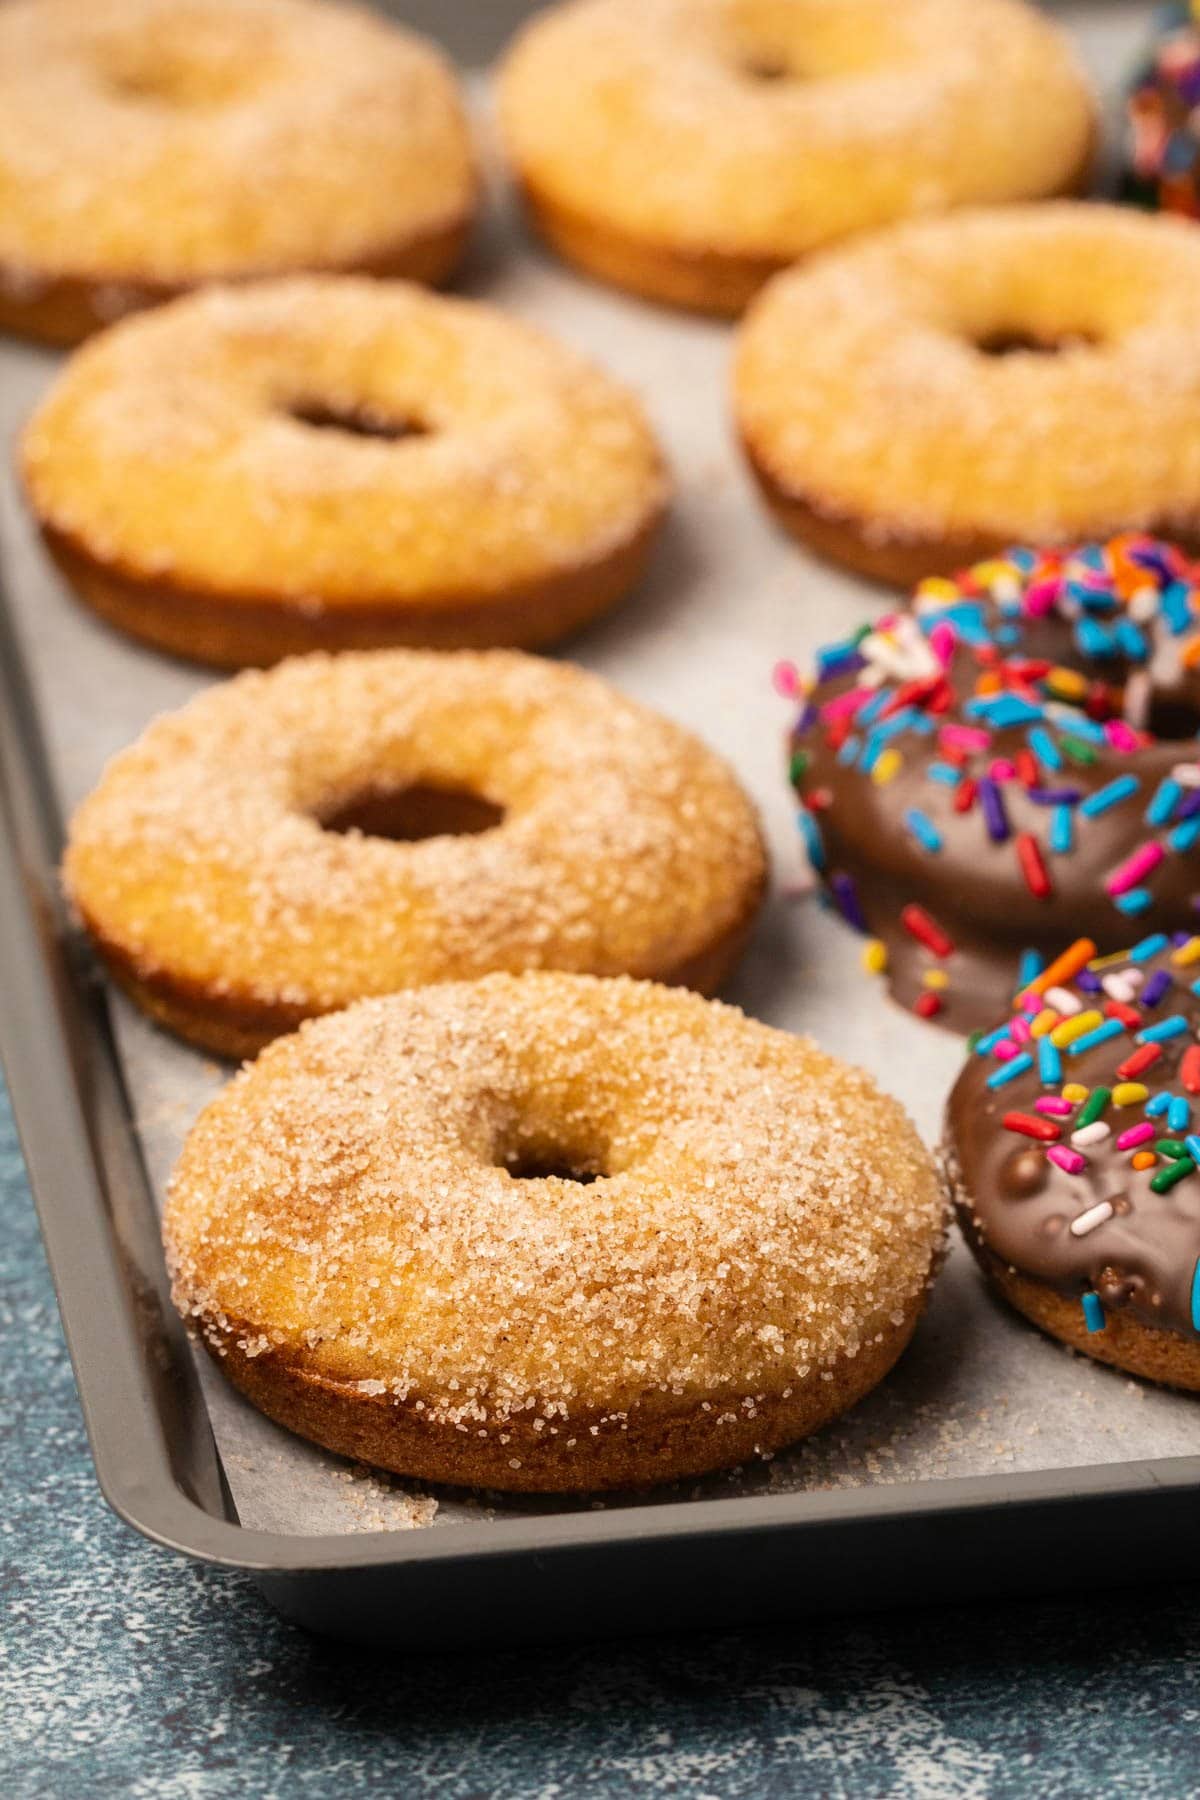 Vegan donuts topped with chocolate and sprinkles or cinnamon and sugar on a parchment lined baking sheet.